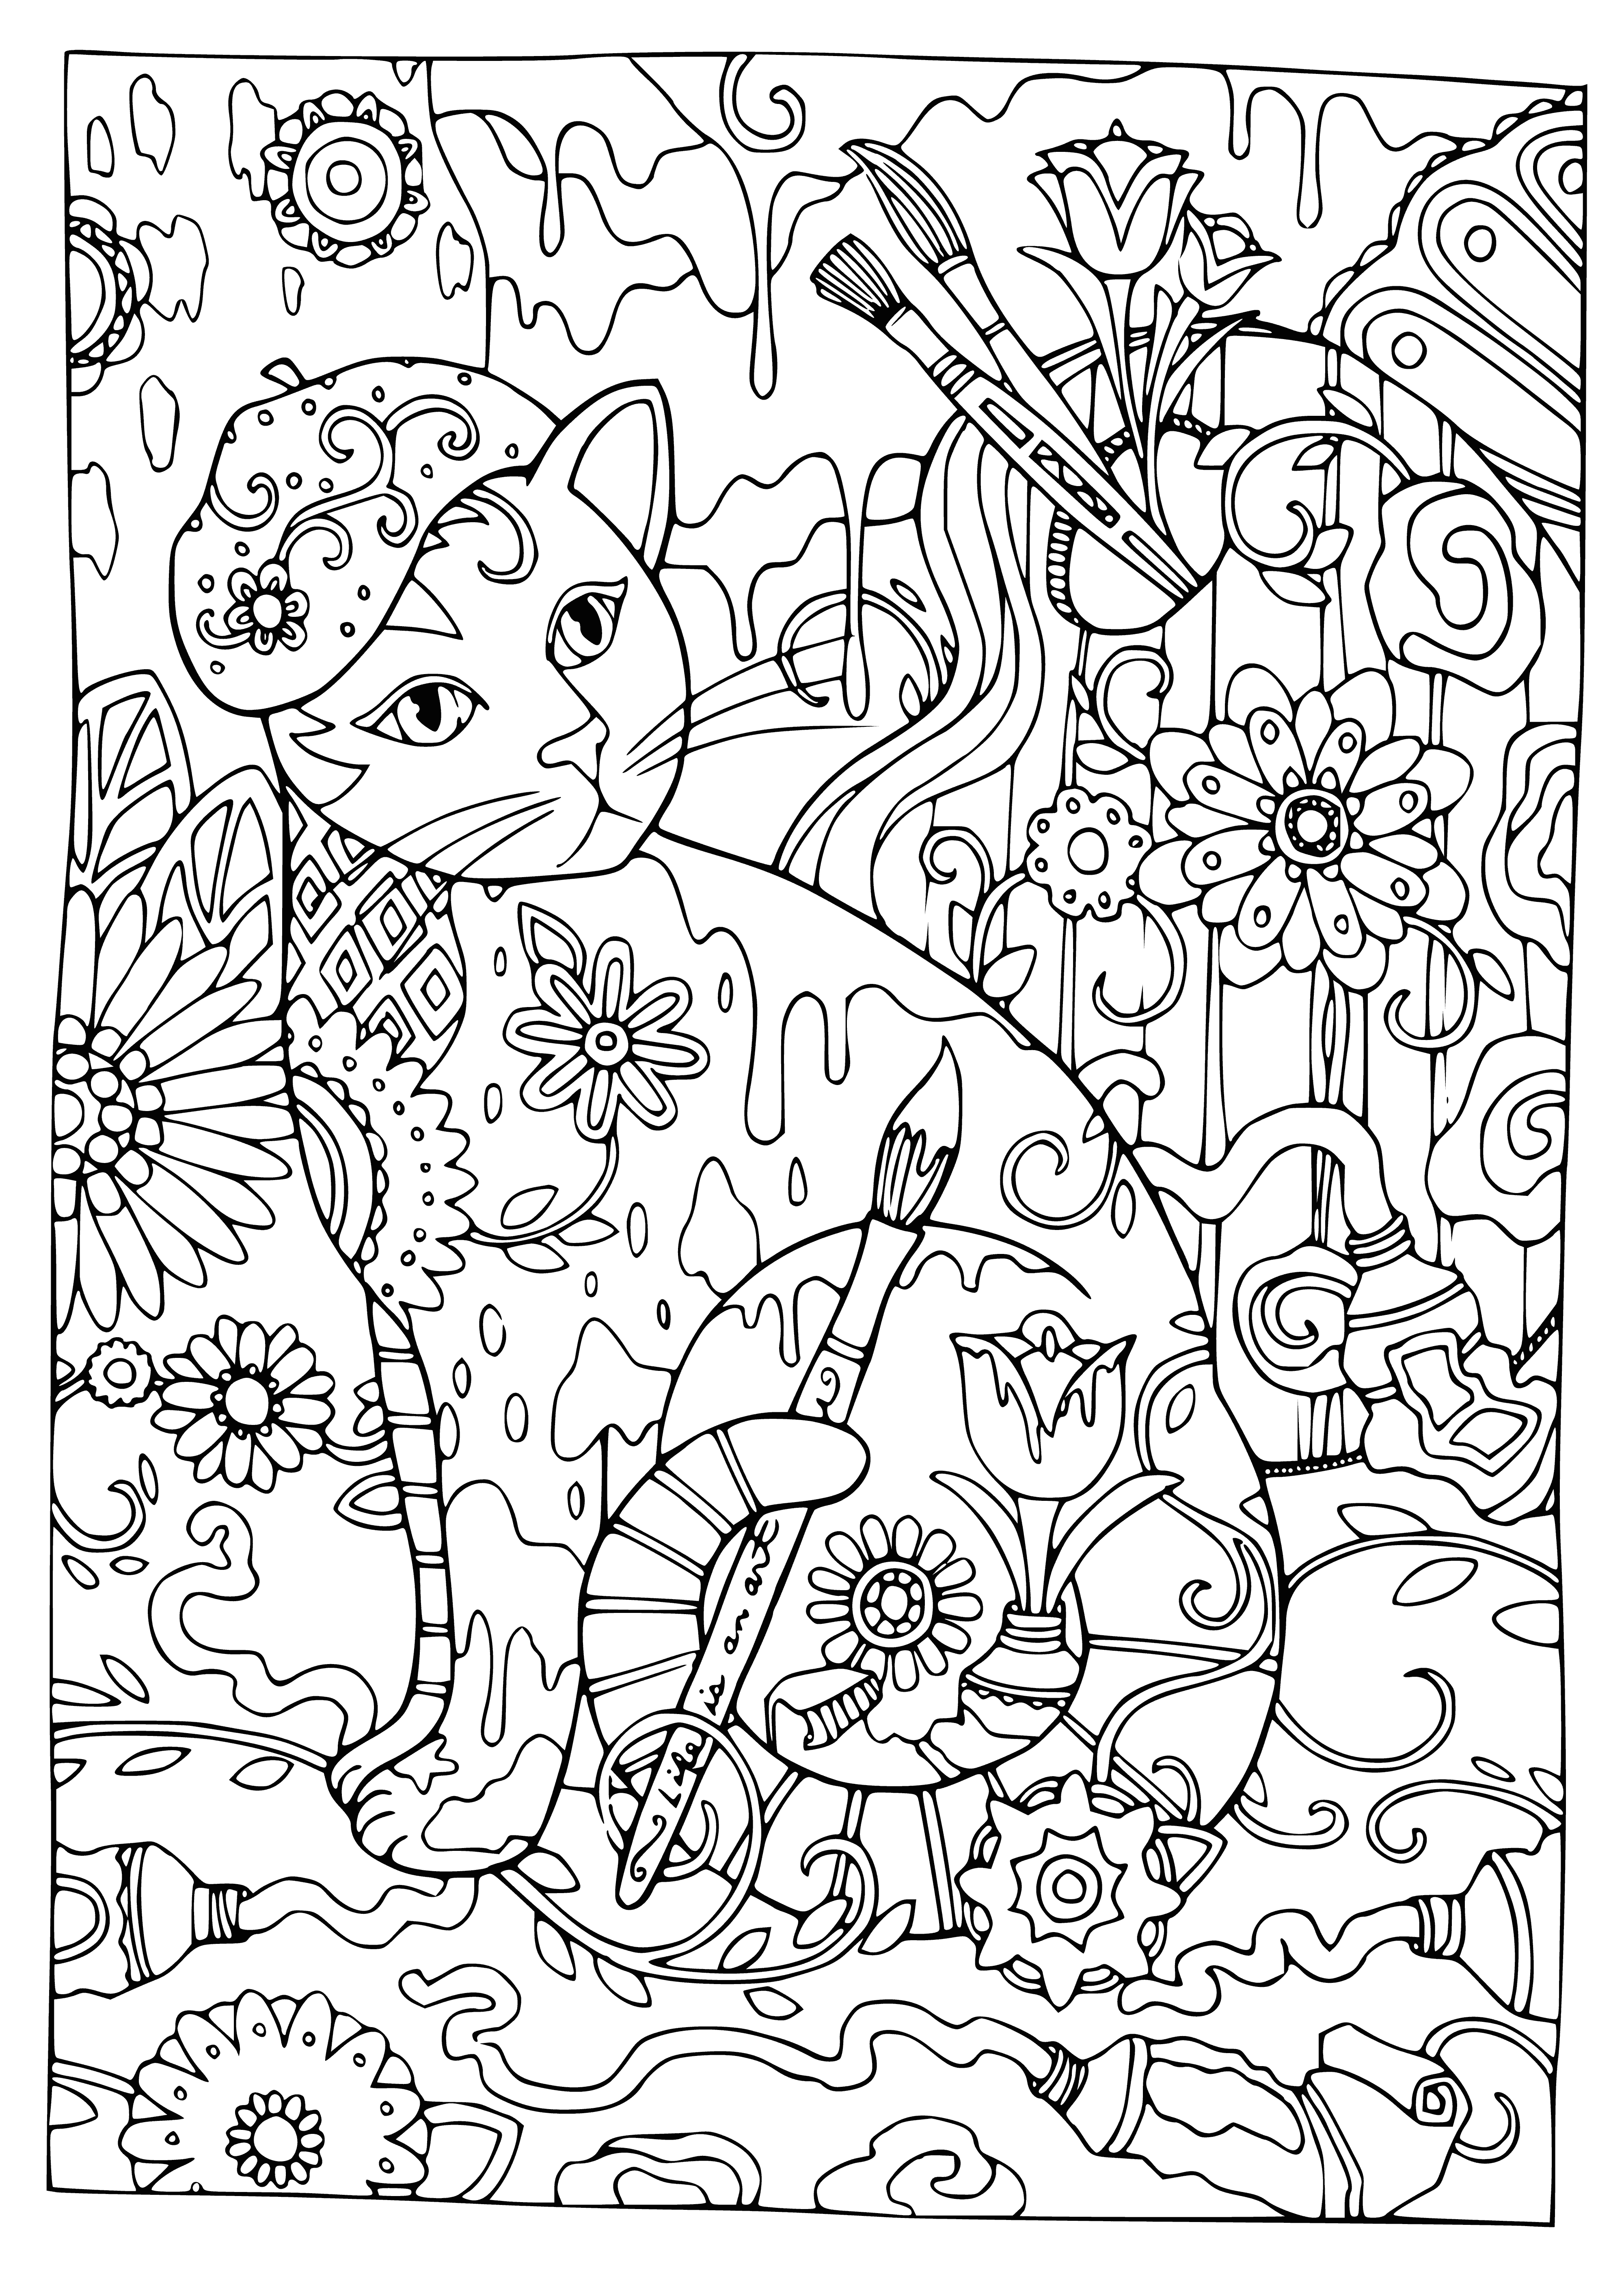 Cat artist coloring page